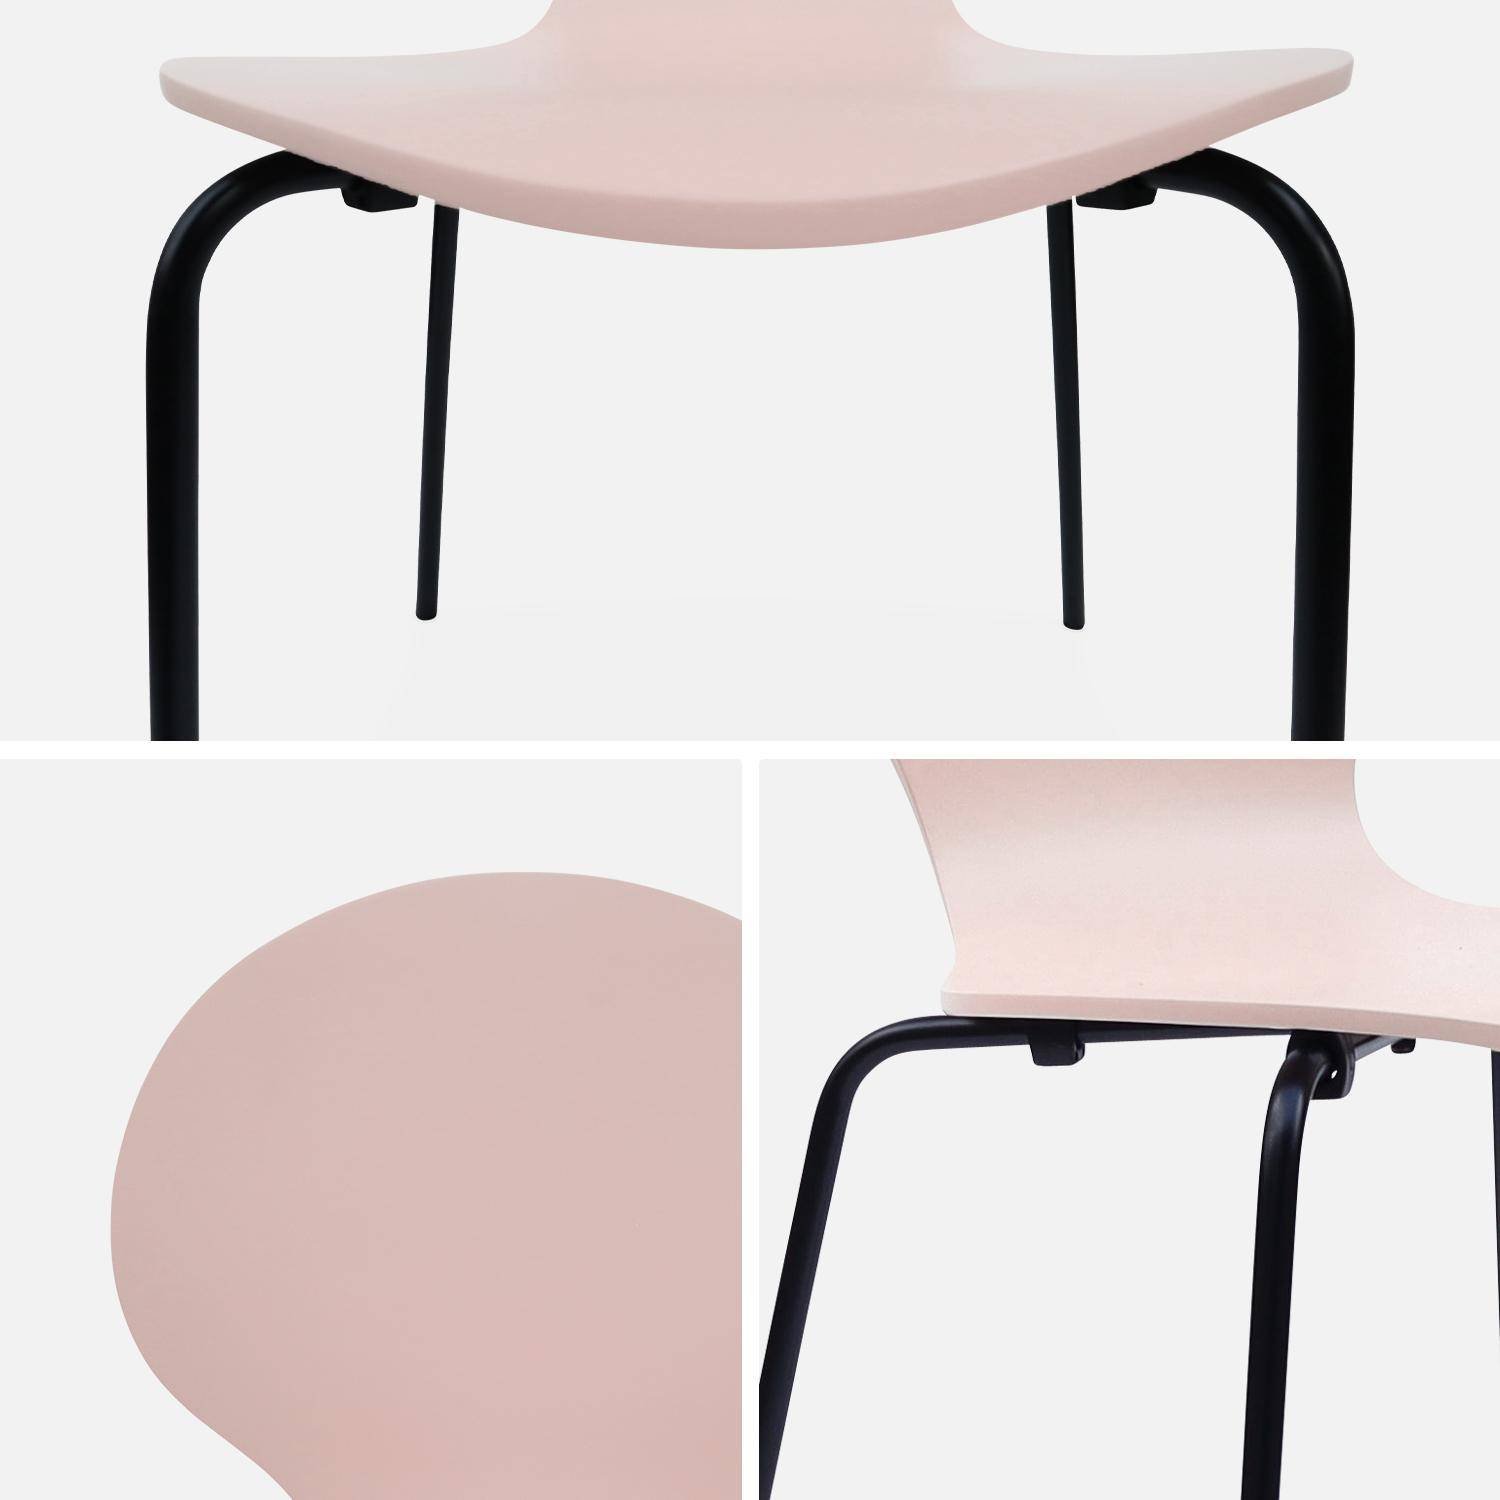 Set of 4 stackable Retro Chairs, Wood and Plywood, L43xW48xH87cm, pink,sweeek,Photo7